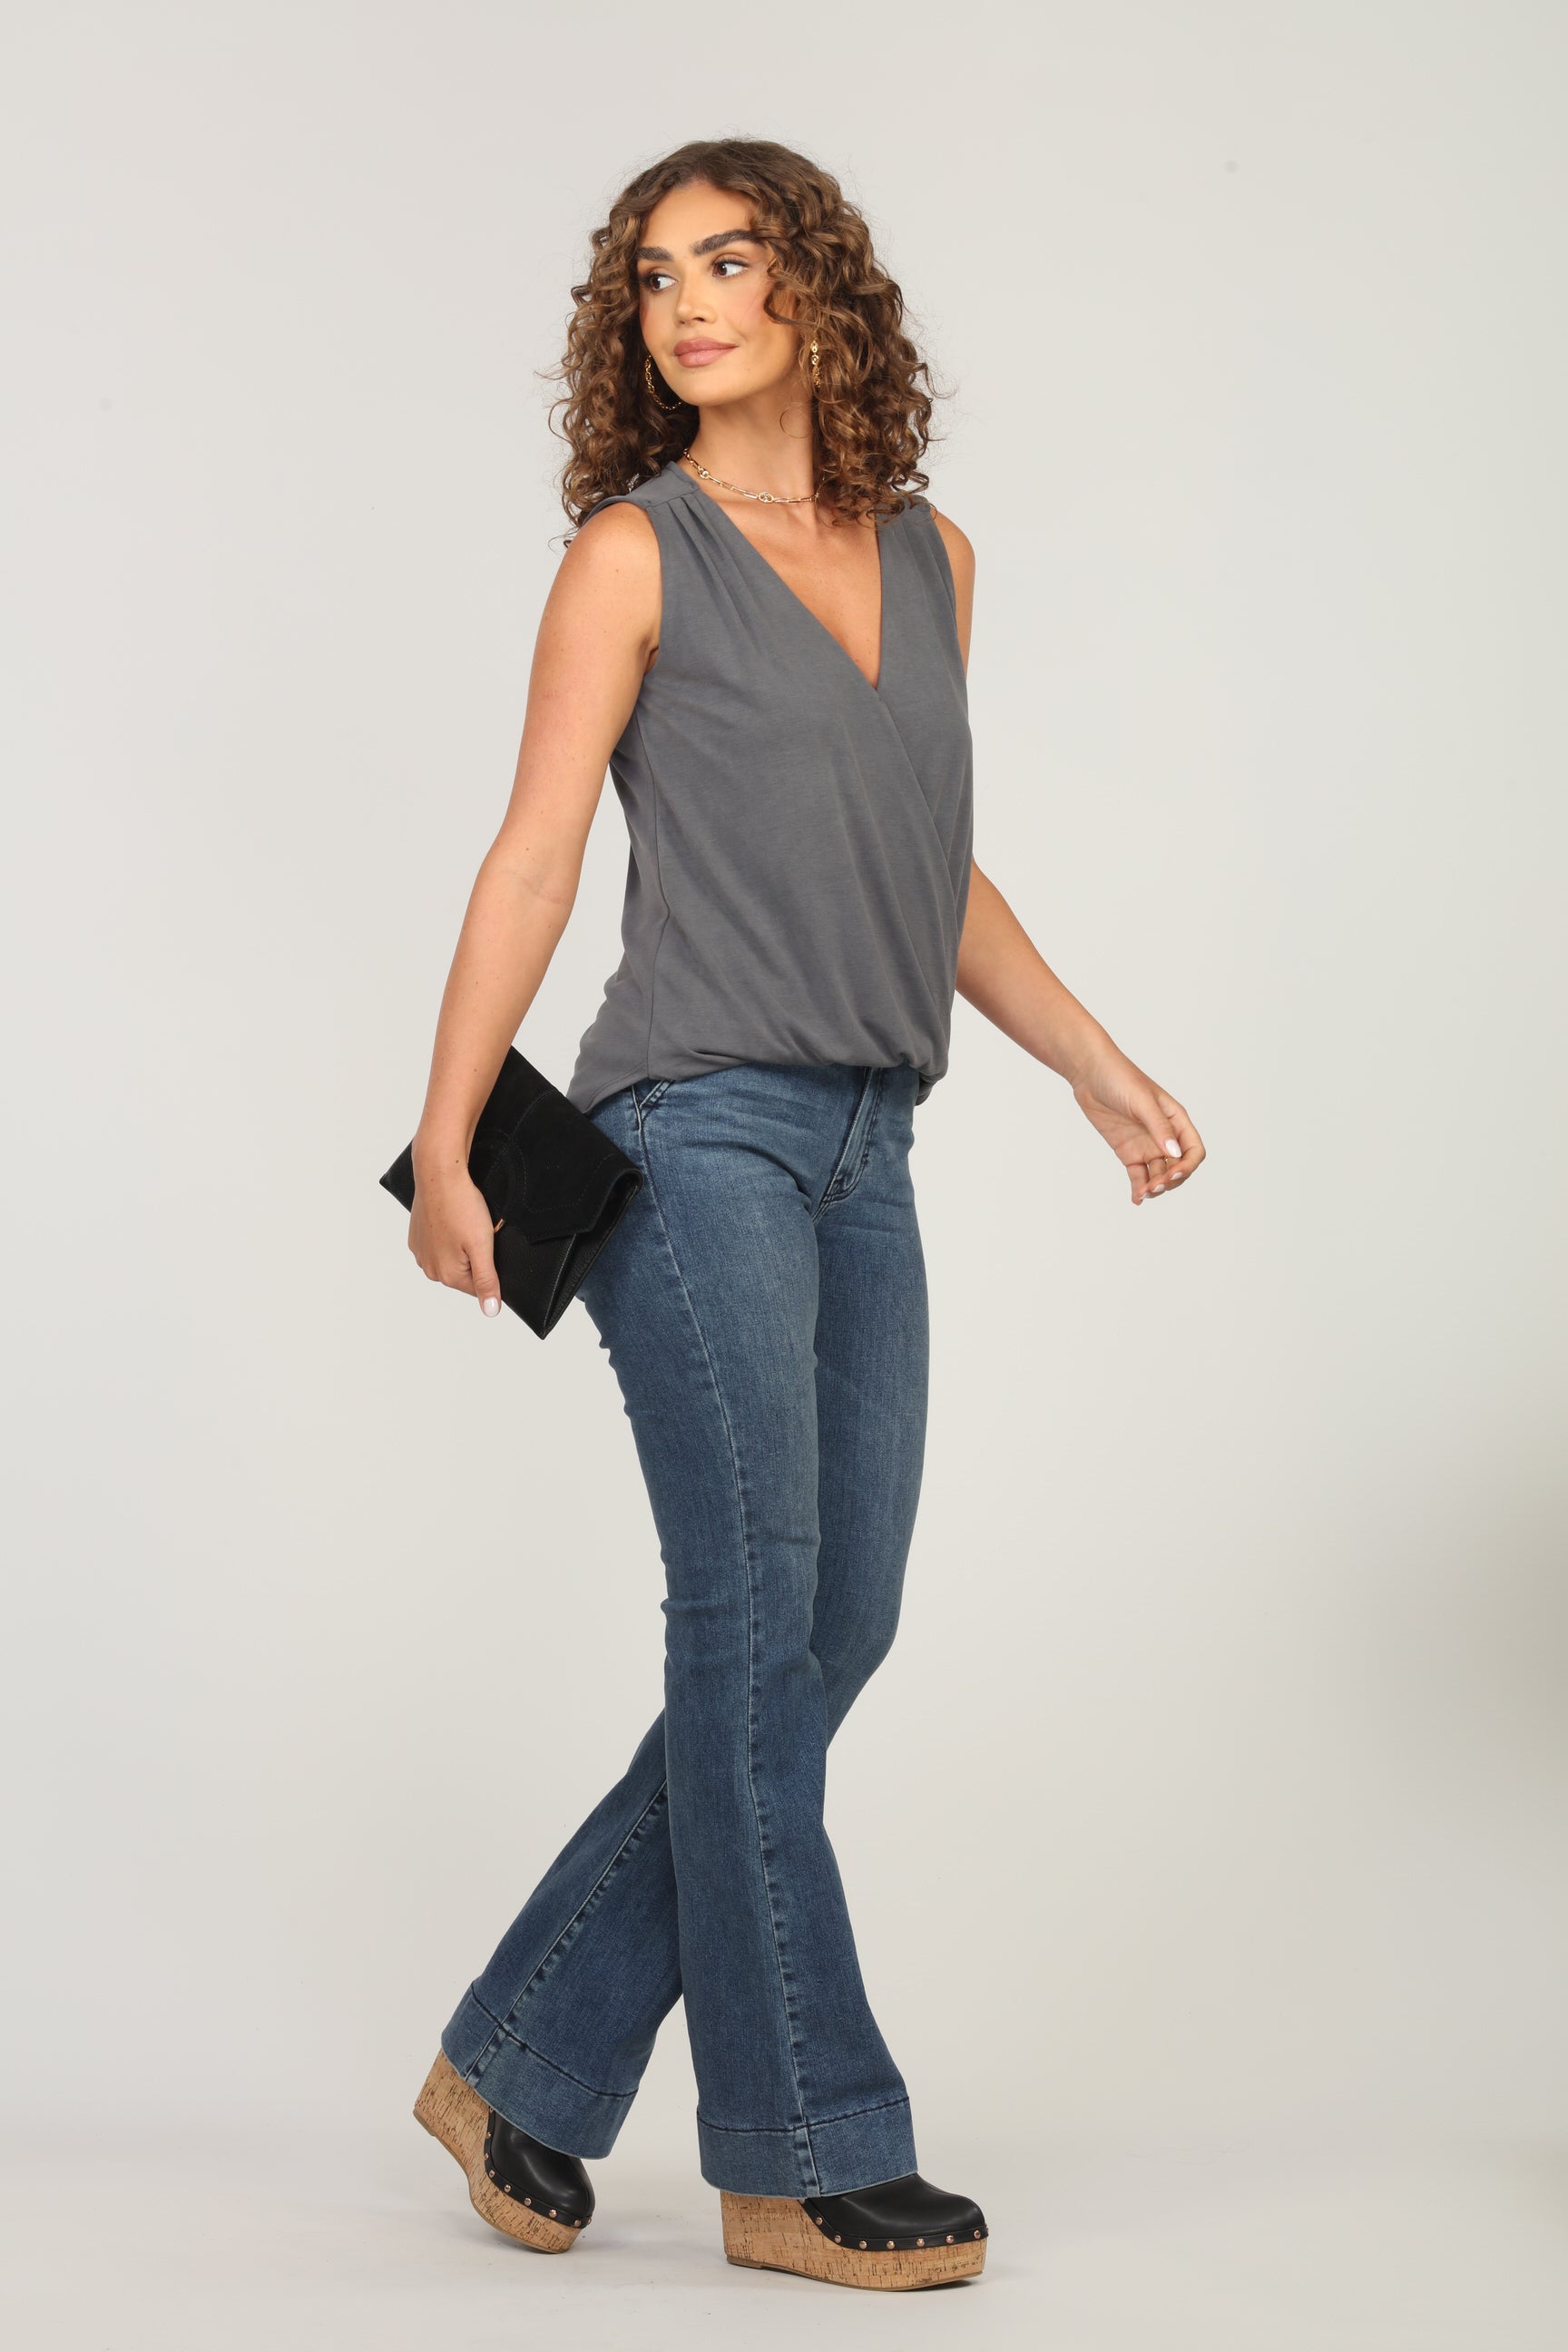 The Everyday Surplice Tank-Charcoal- BEST SELLER